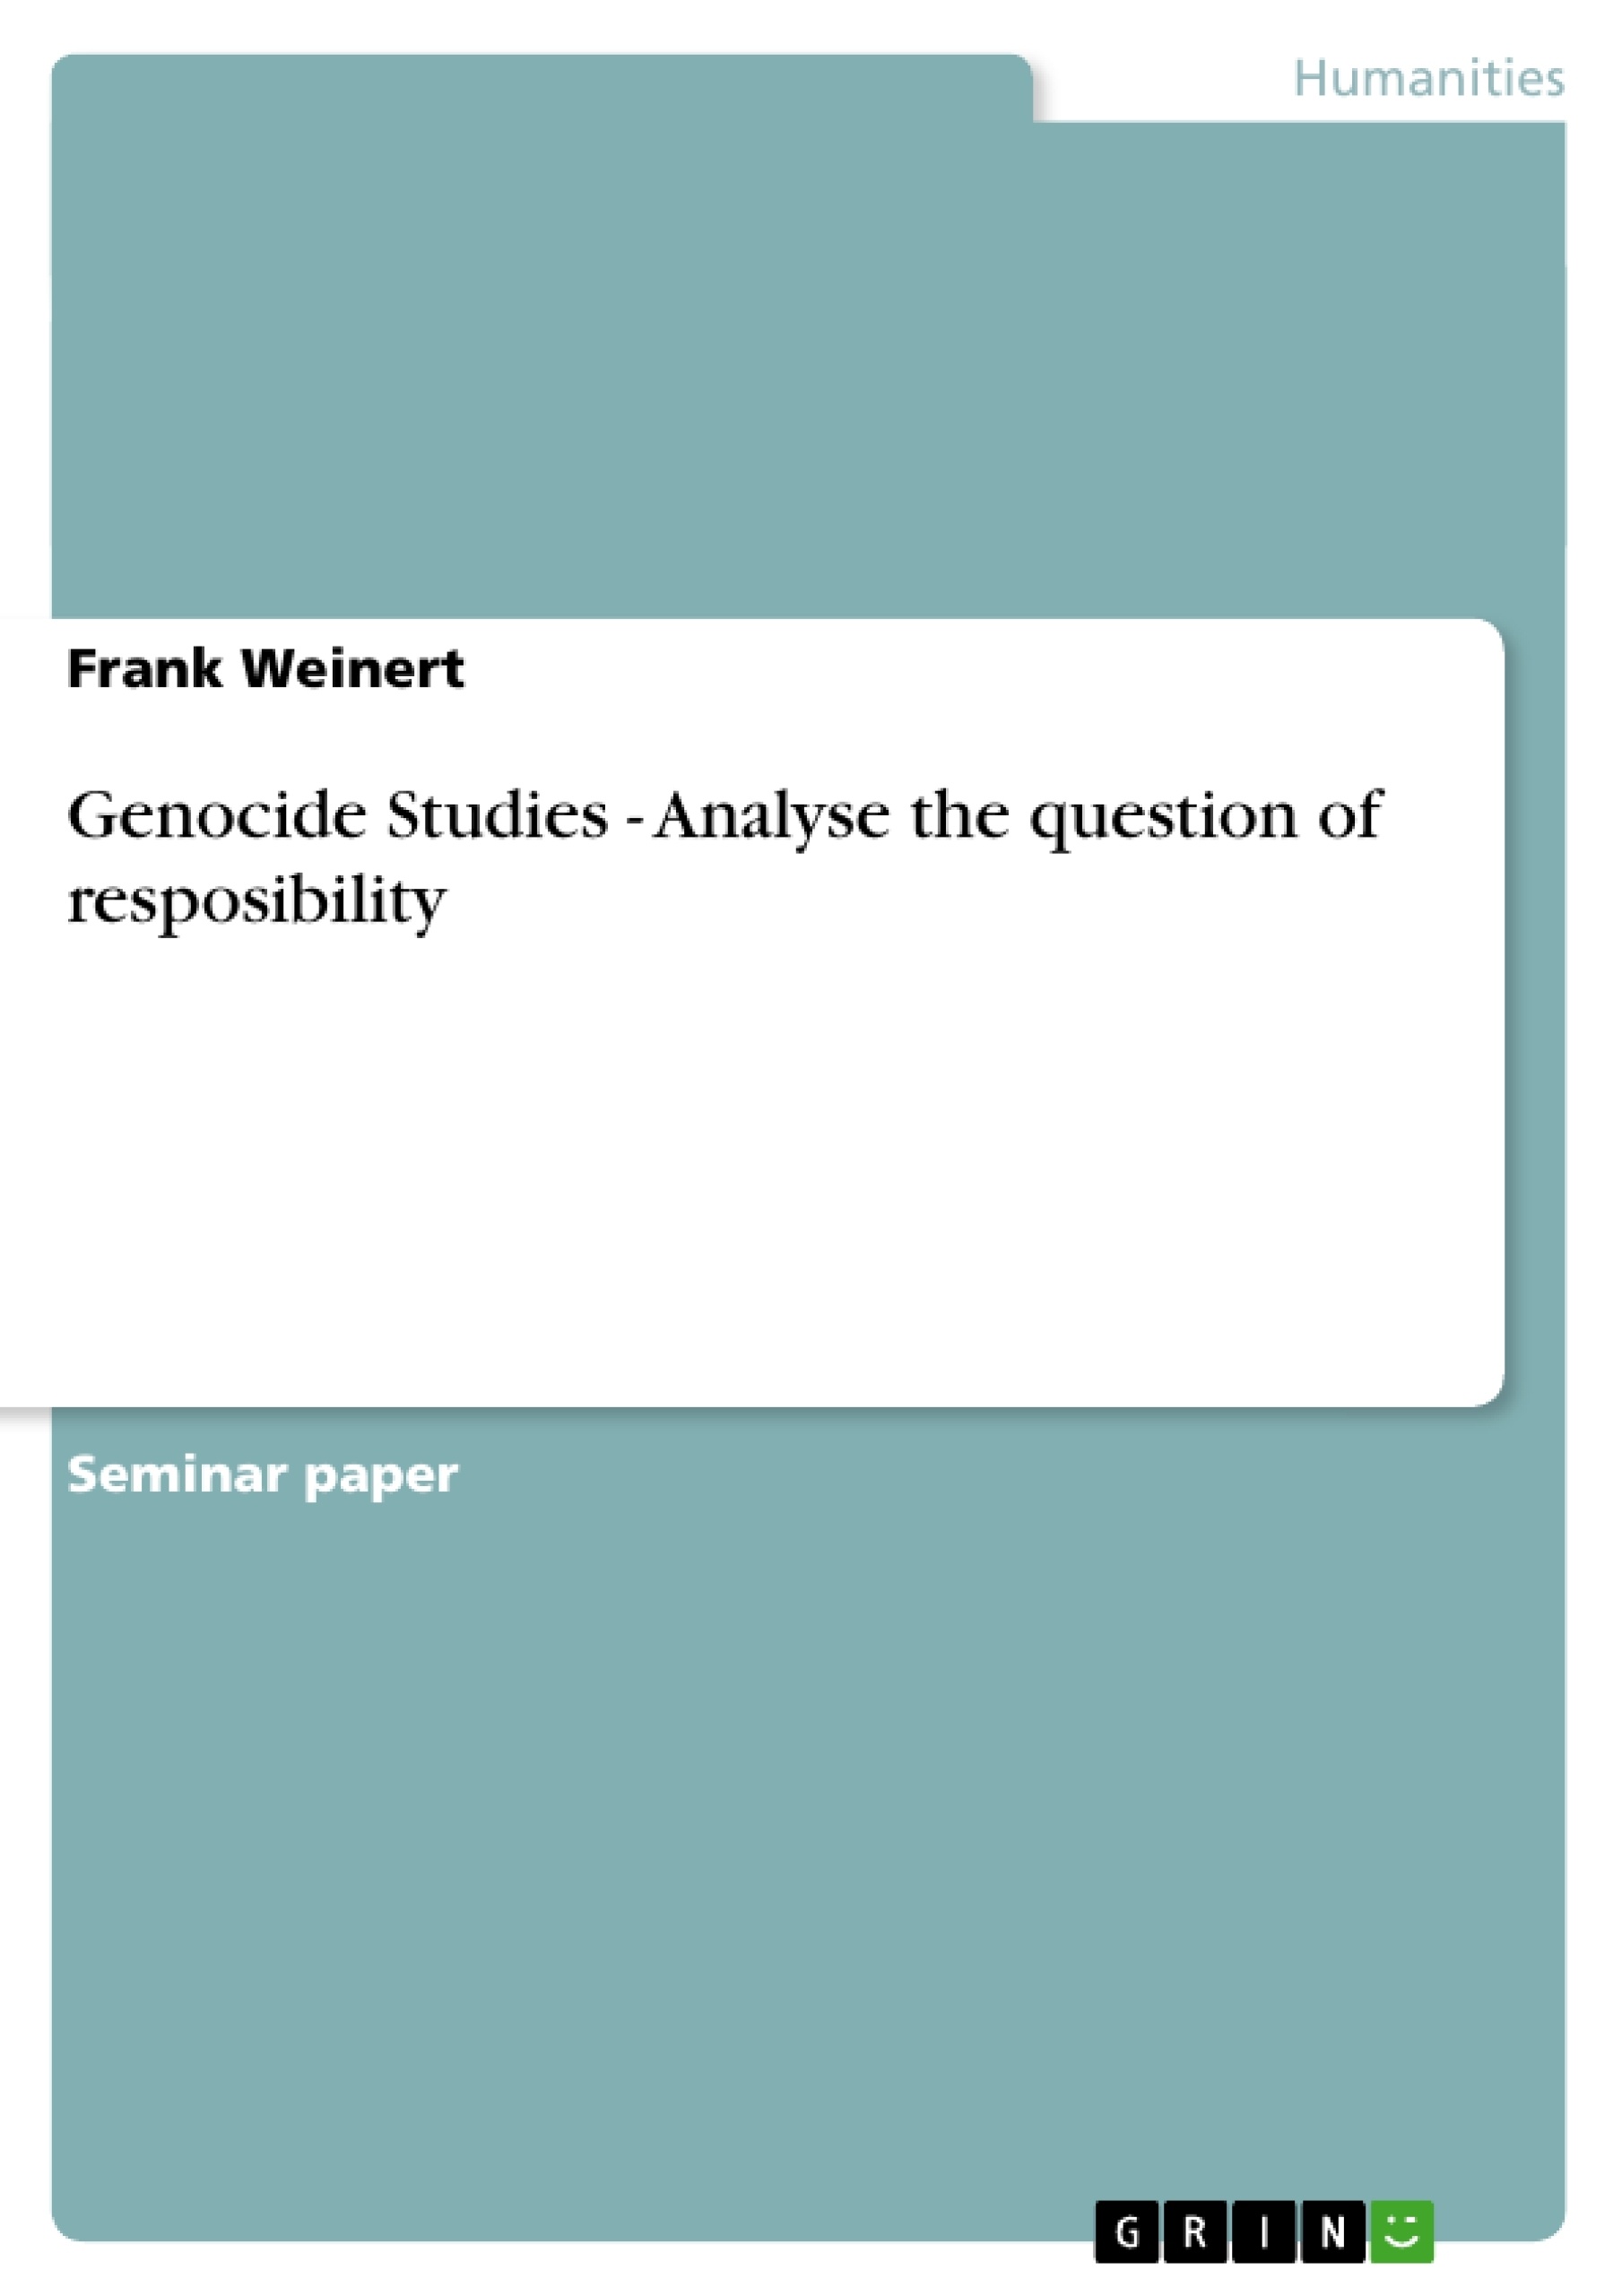 Title: Genocide Studies - Analyse the question of resposibility